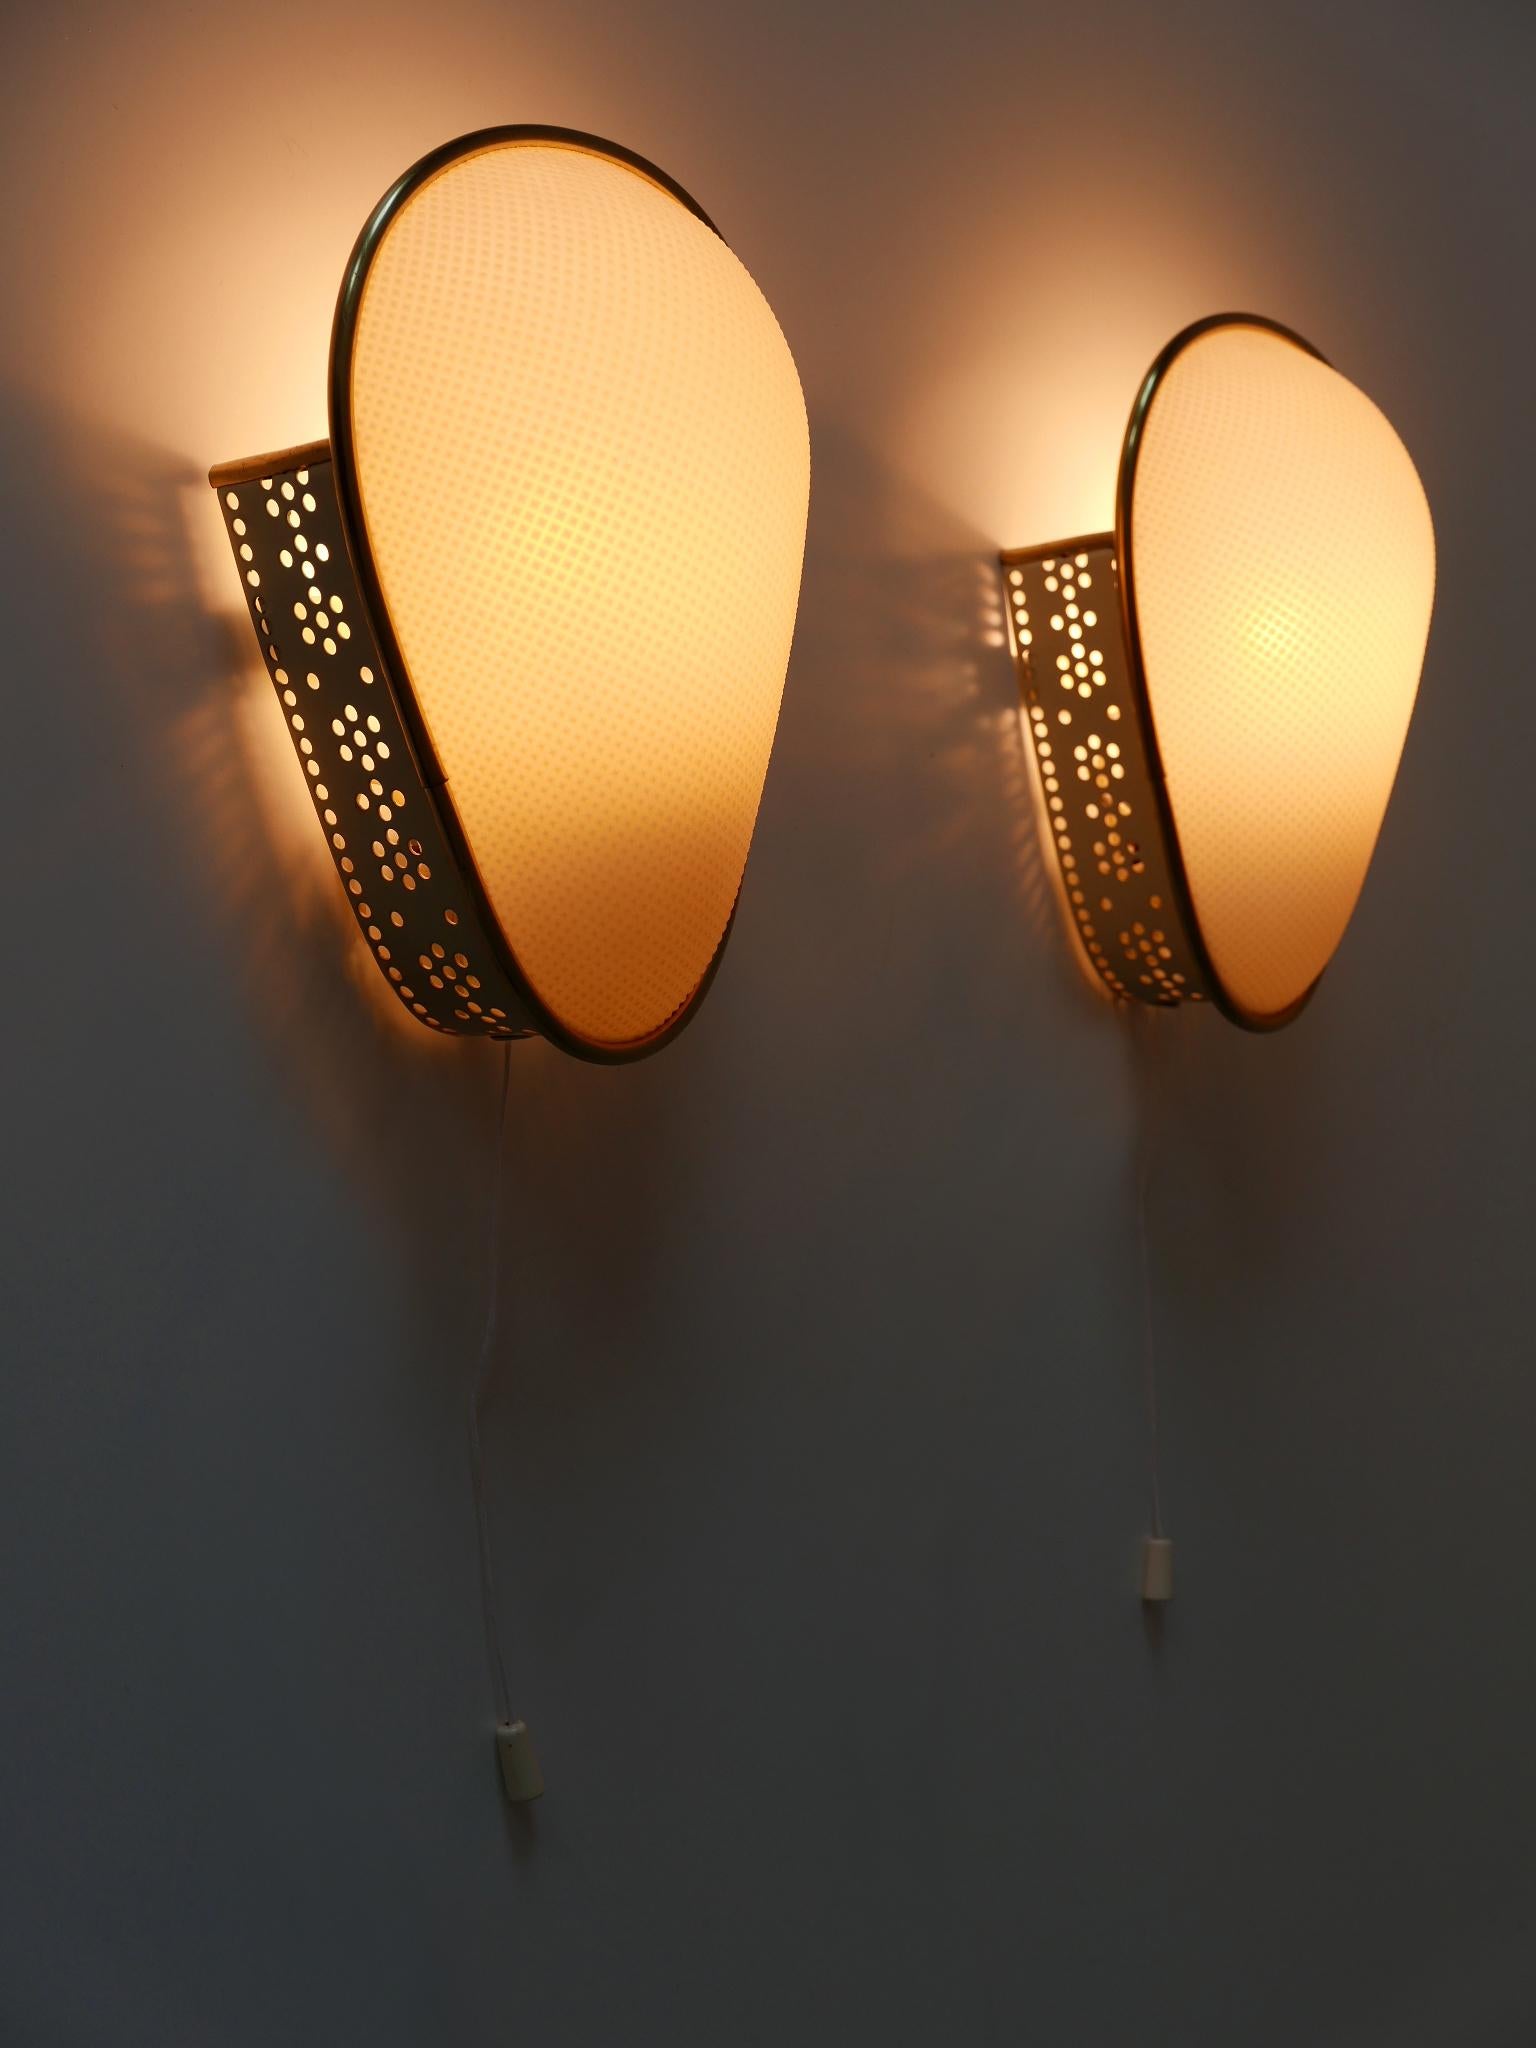 Set of Two Rare & Elegant Mid-Century Modern Sconces or Wall Lamps Germany 1950s For Sale 5